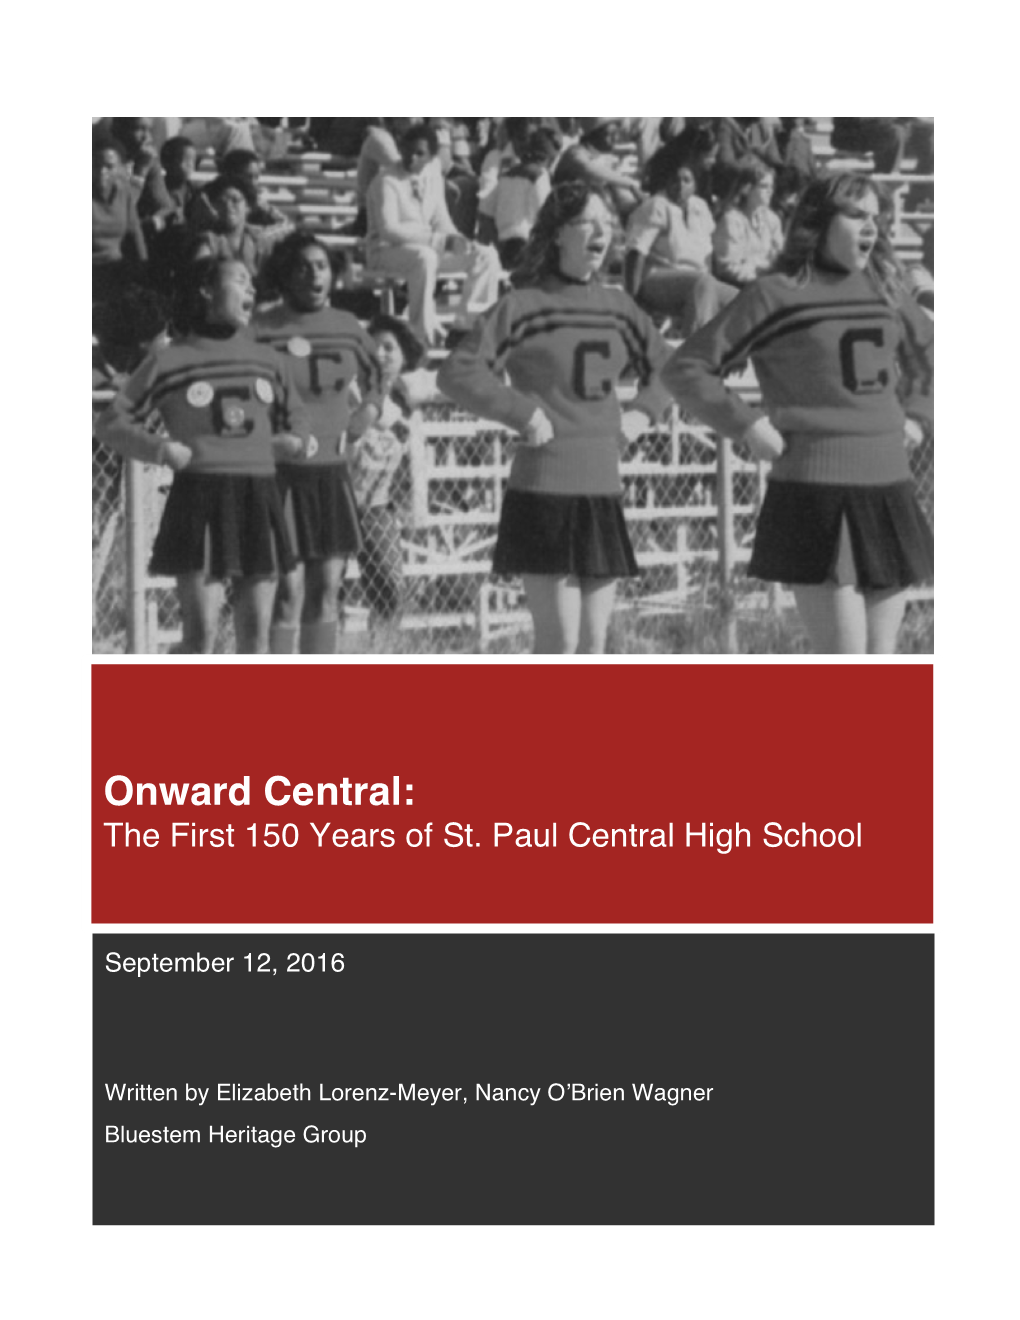 Onward Central: the First 150 Years of St